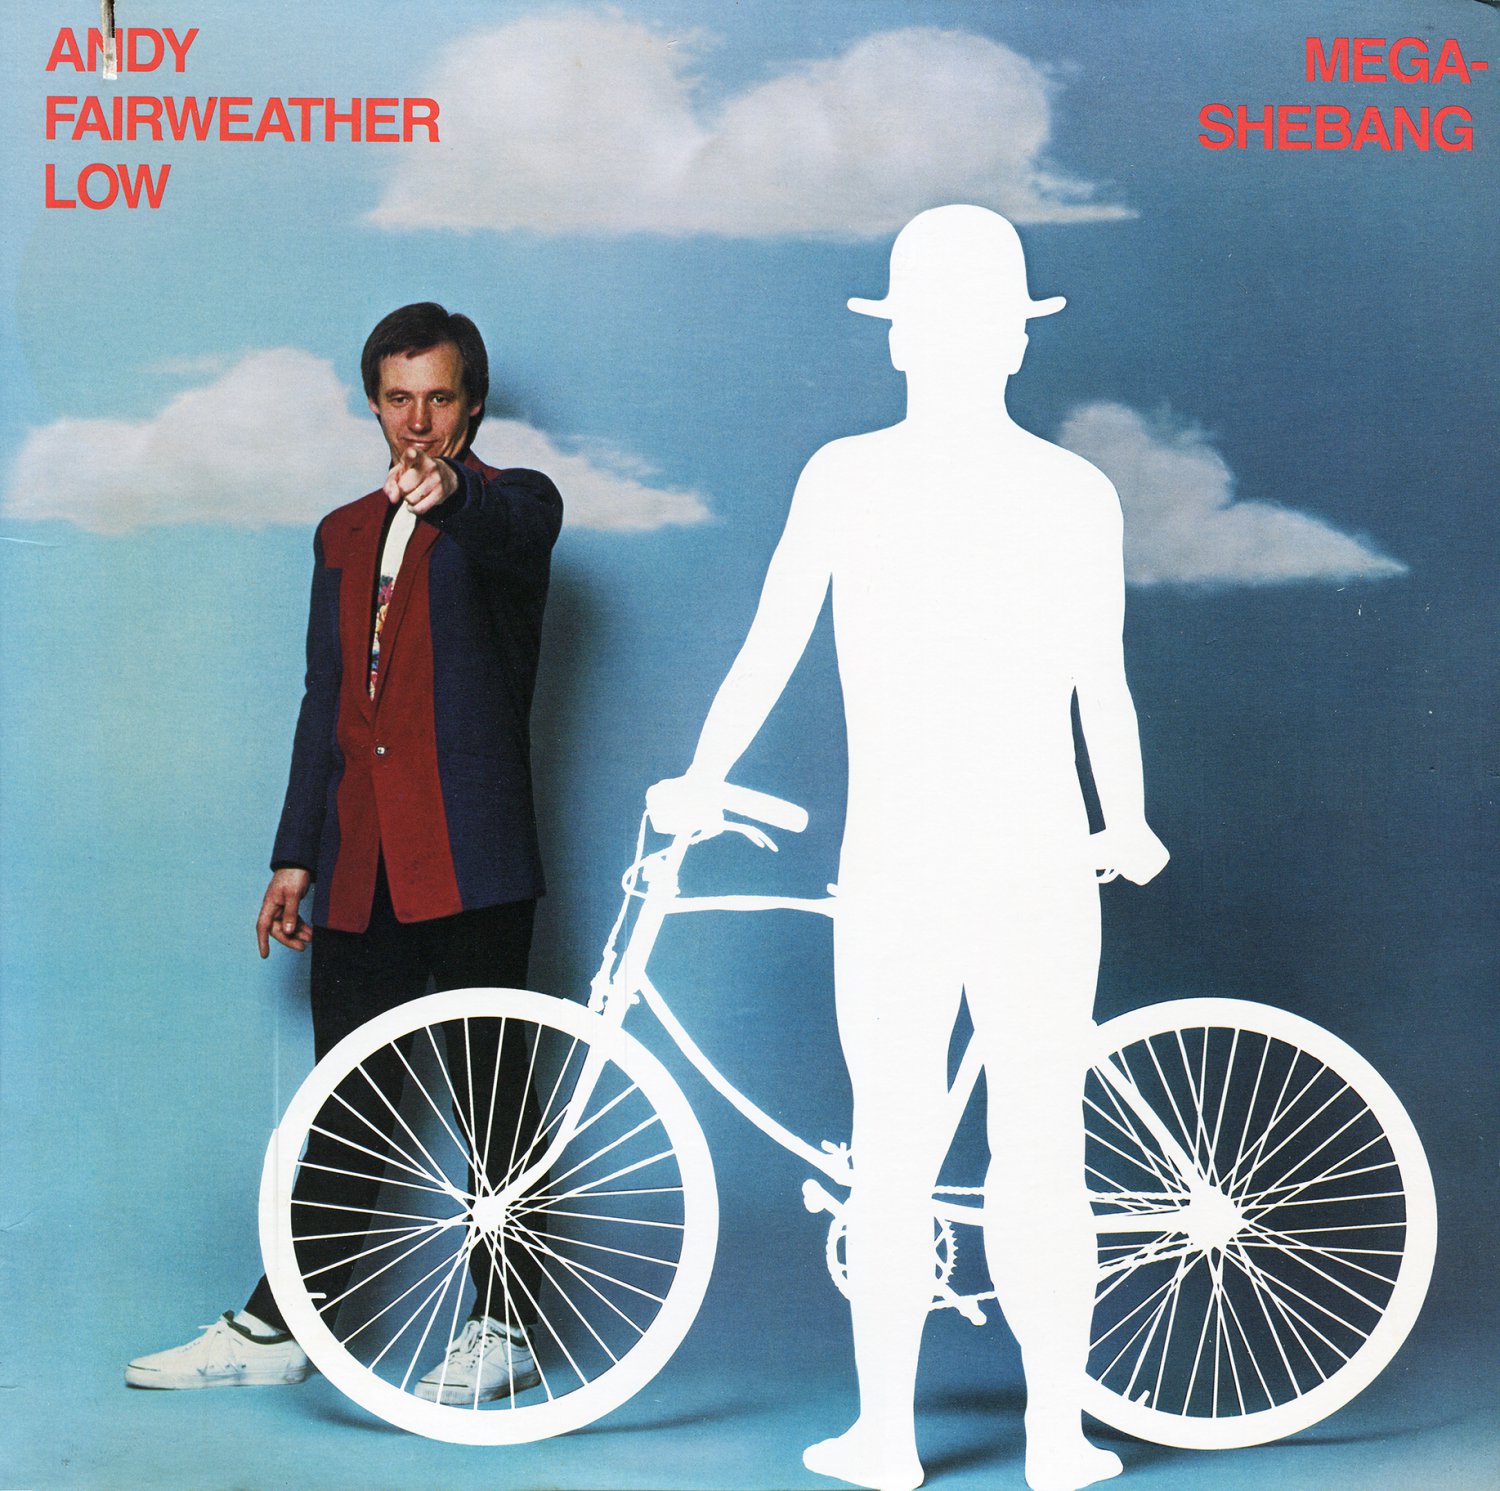 Andy Fairweather Low Discography